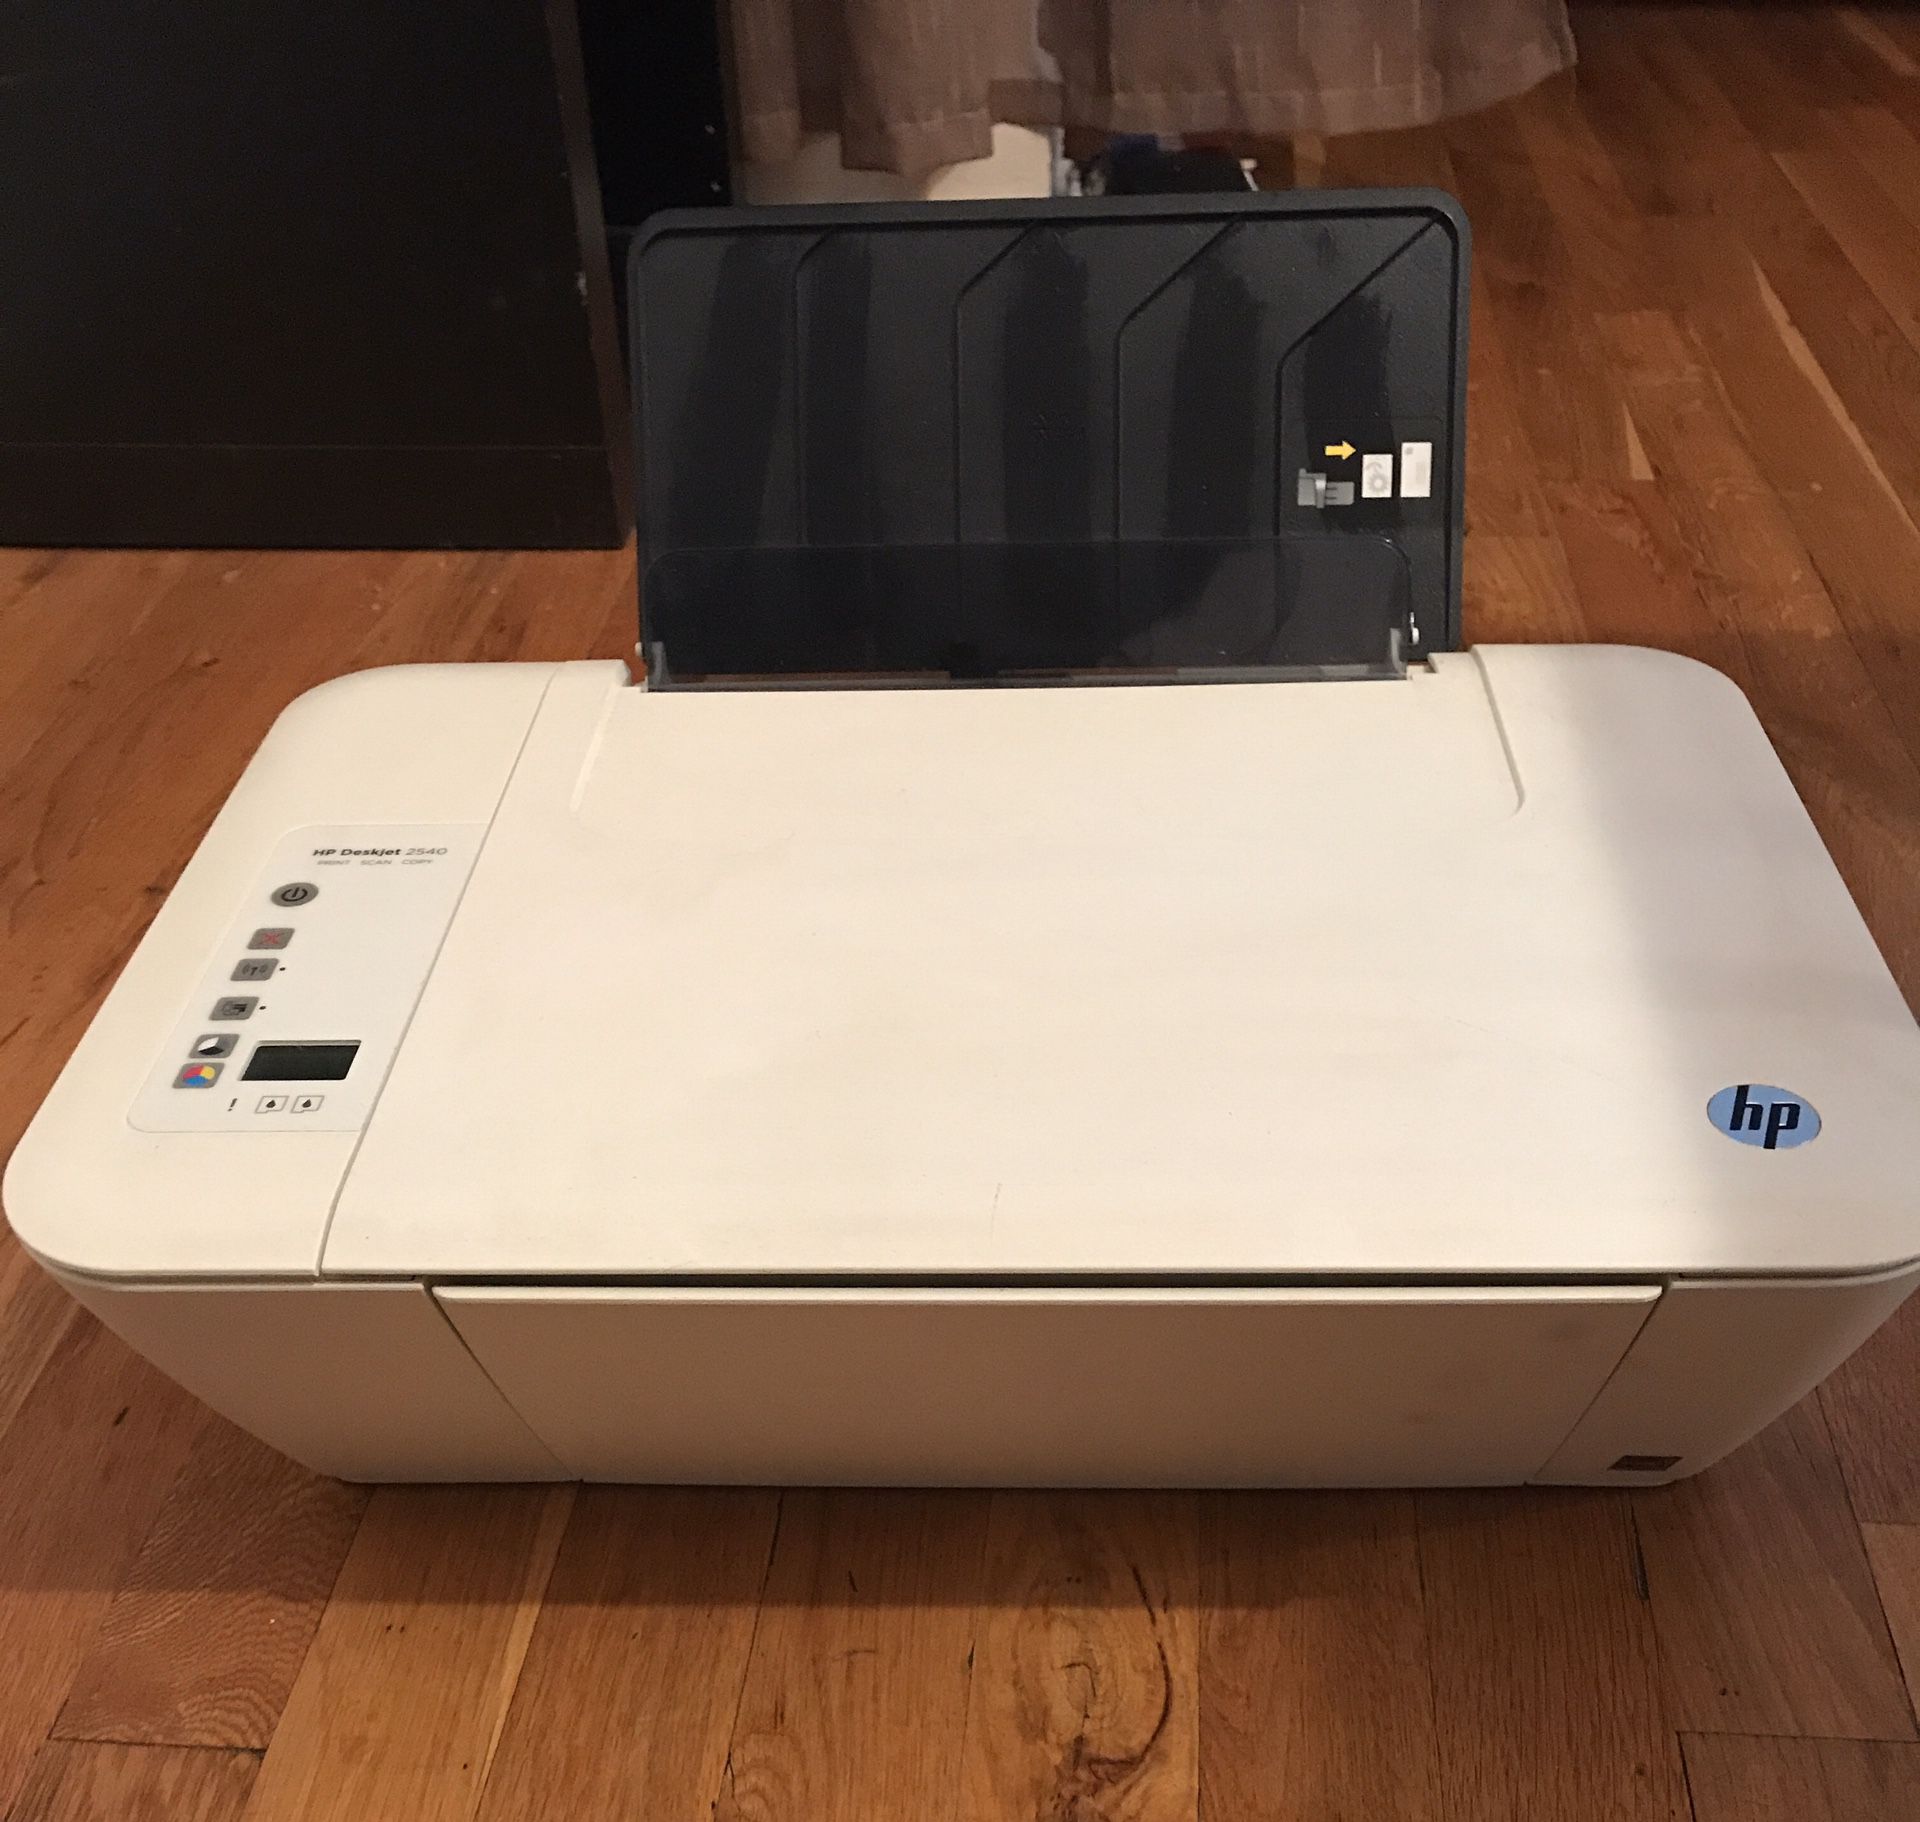 HP Deskjet 2540 , printer , scanner, copy $ 55 very good condition, just need wire, Or best offer